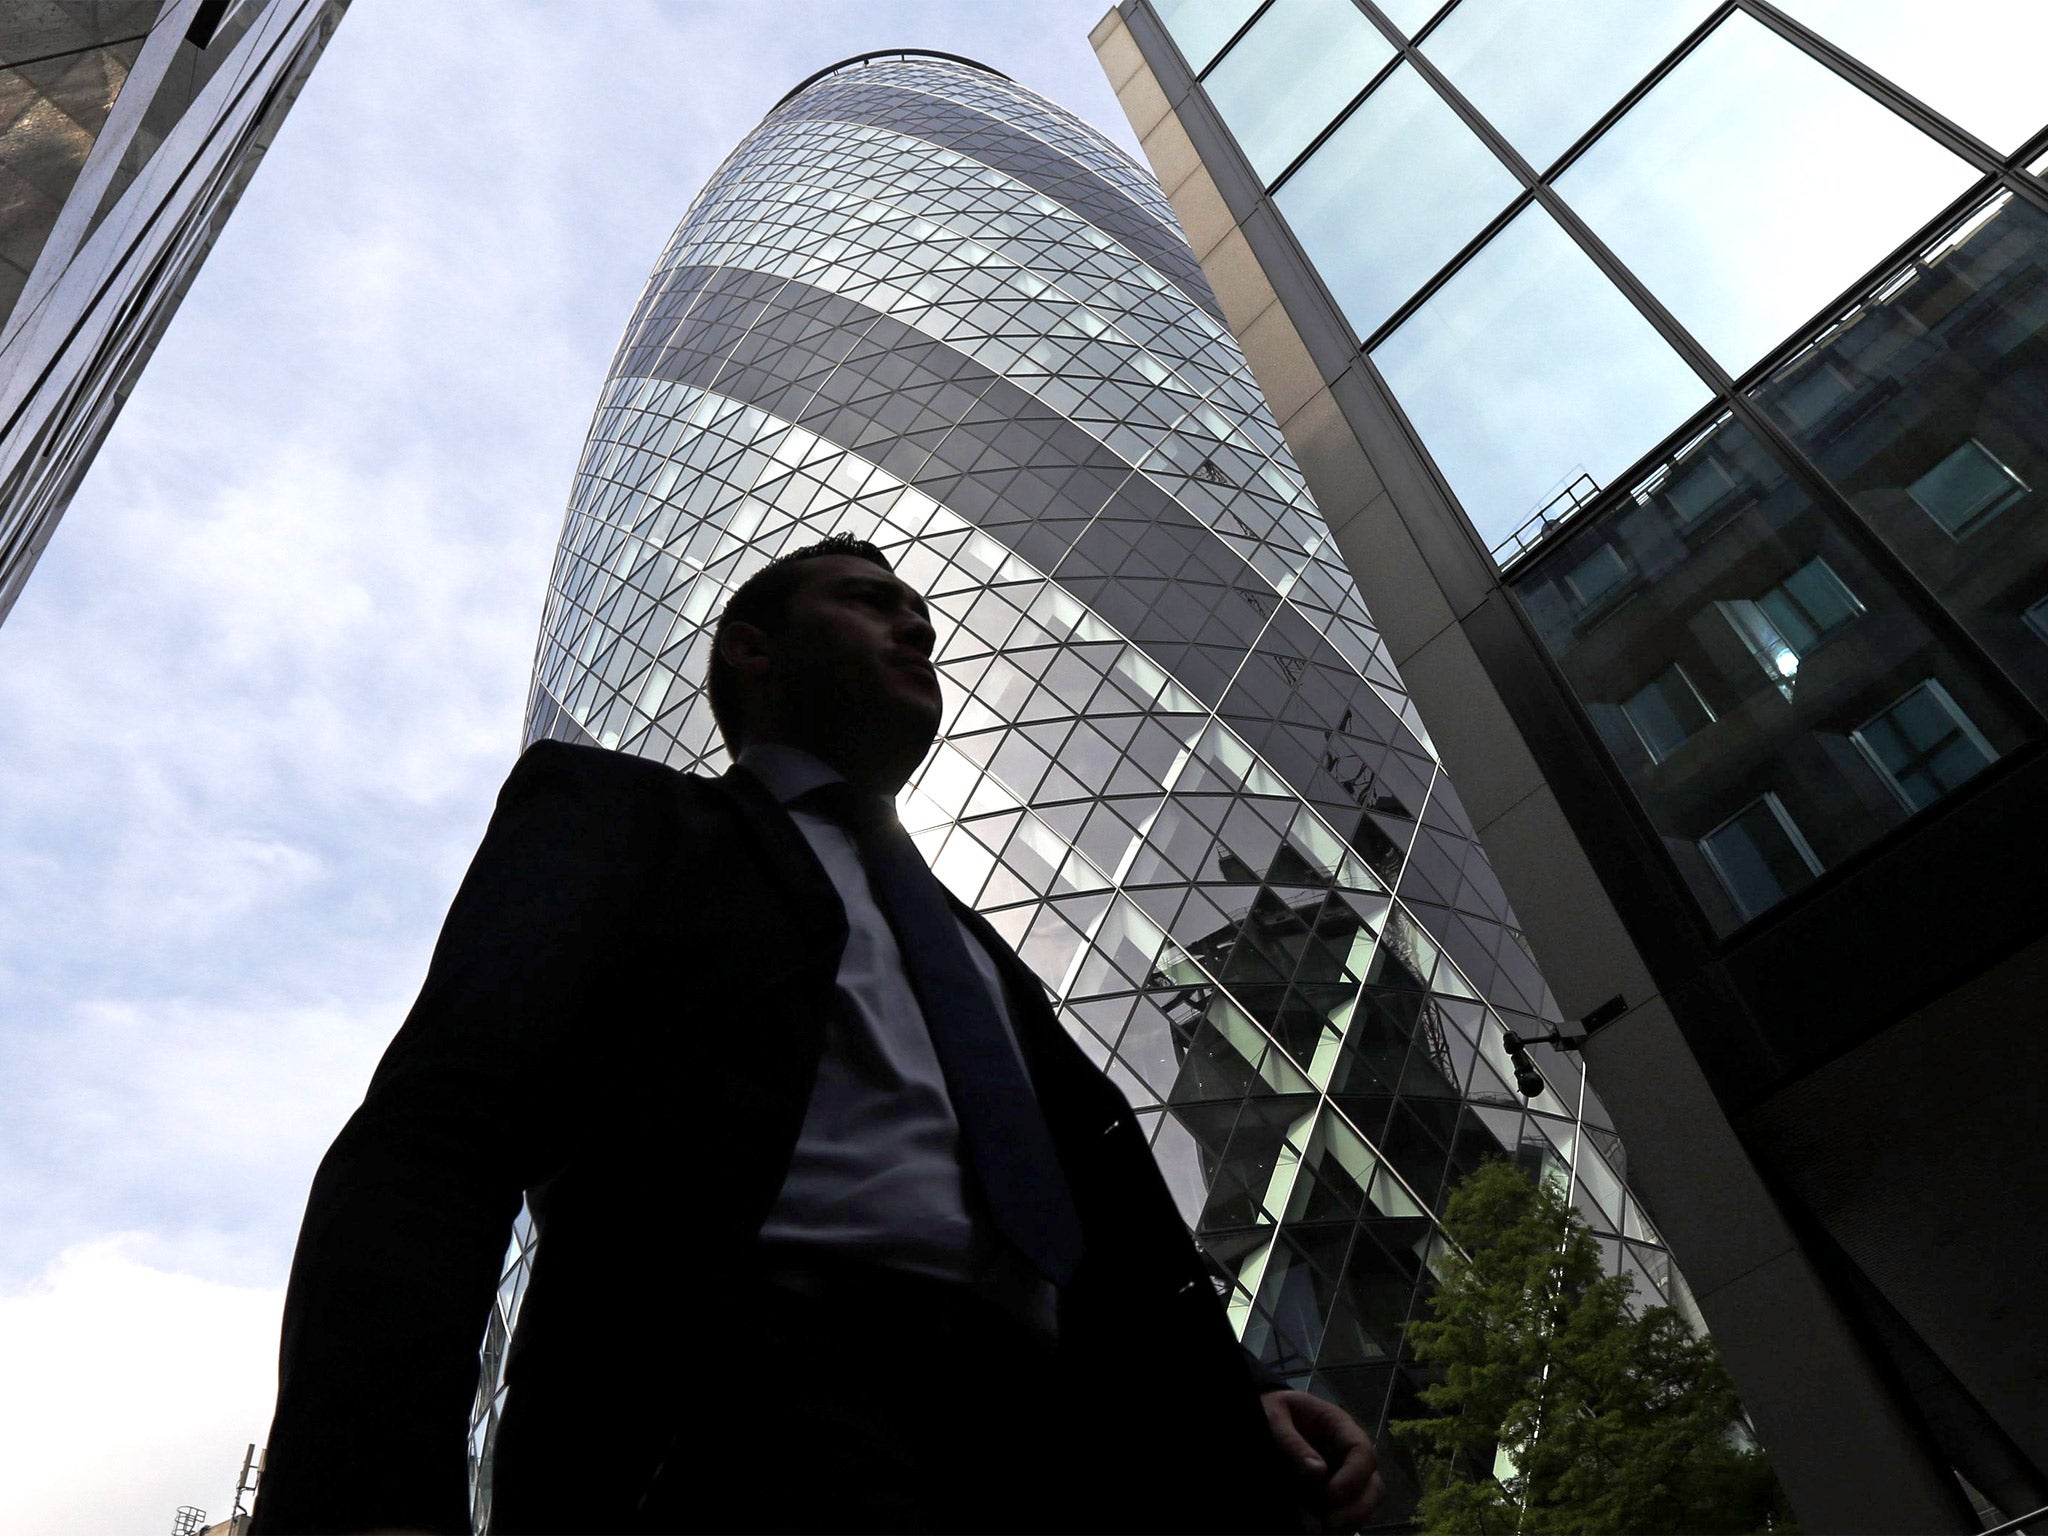 Bonuses jumped by £700m in the City of London in April